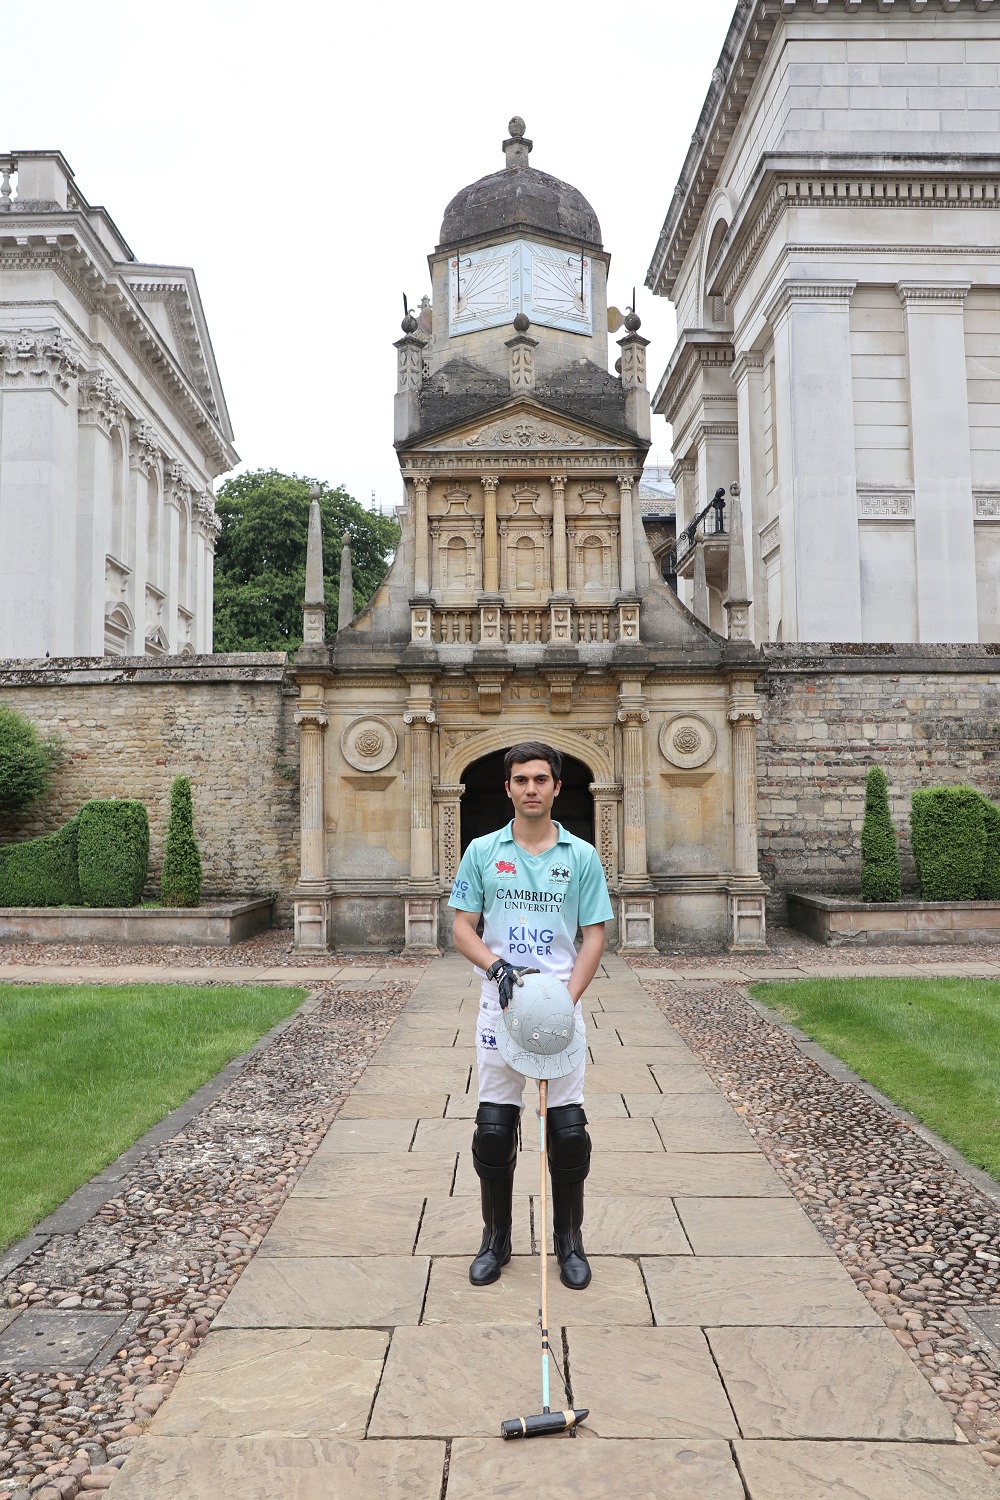 A man in polo kit standing in front of Caius College's Gate of Honour